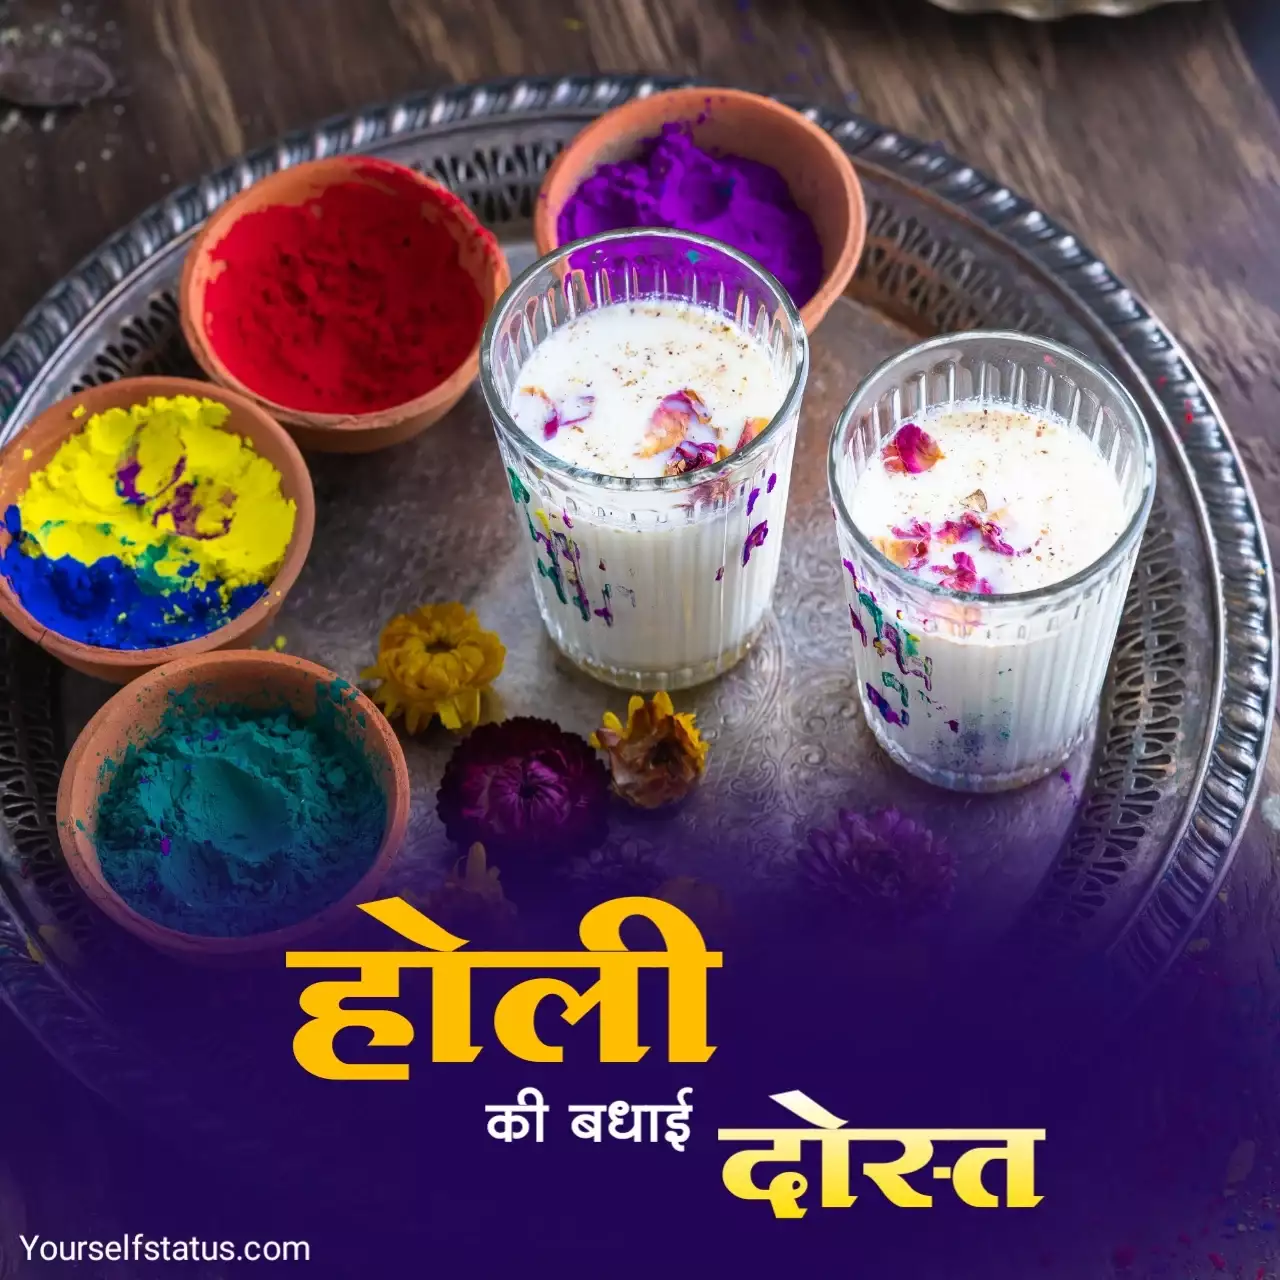 Holi wishes in hindi for friends